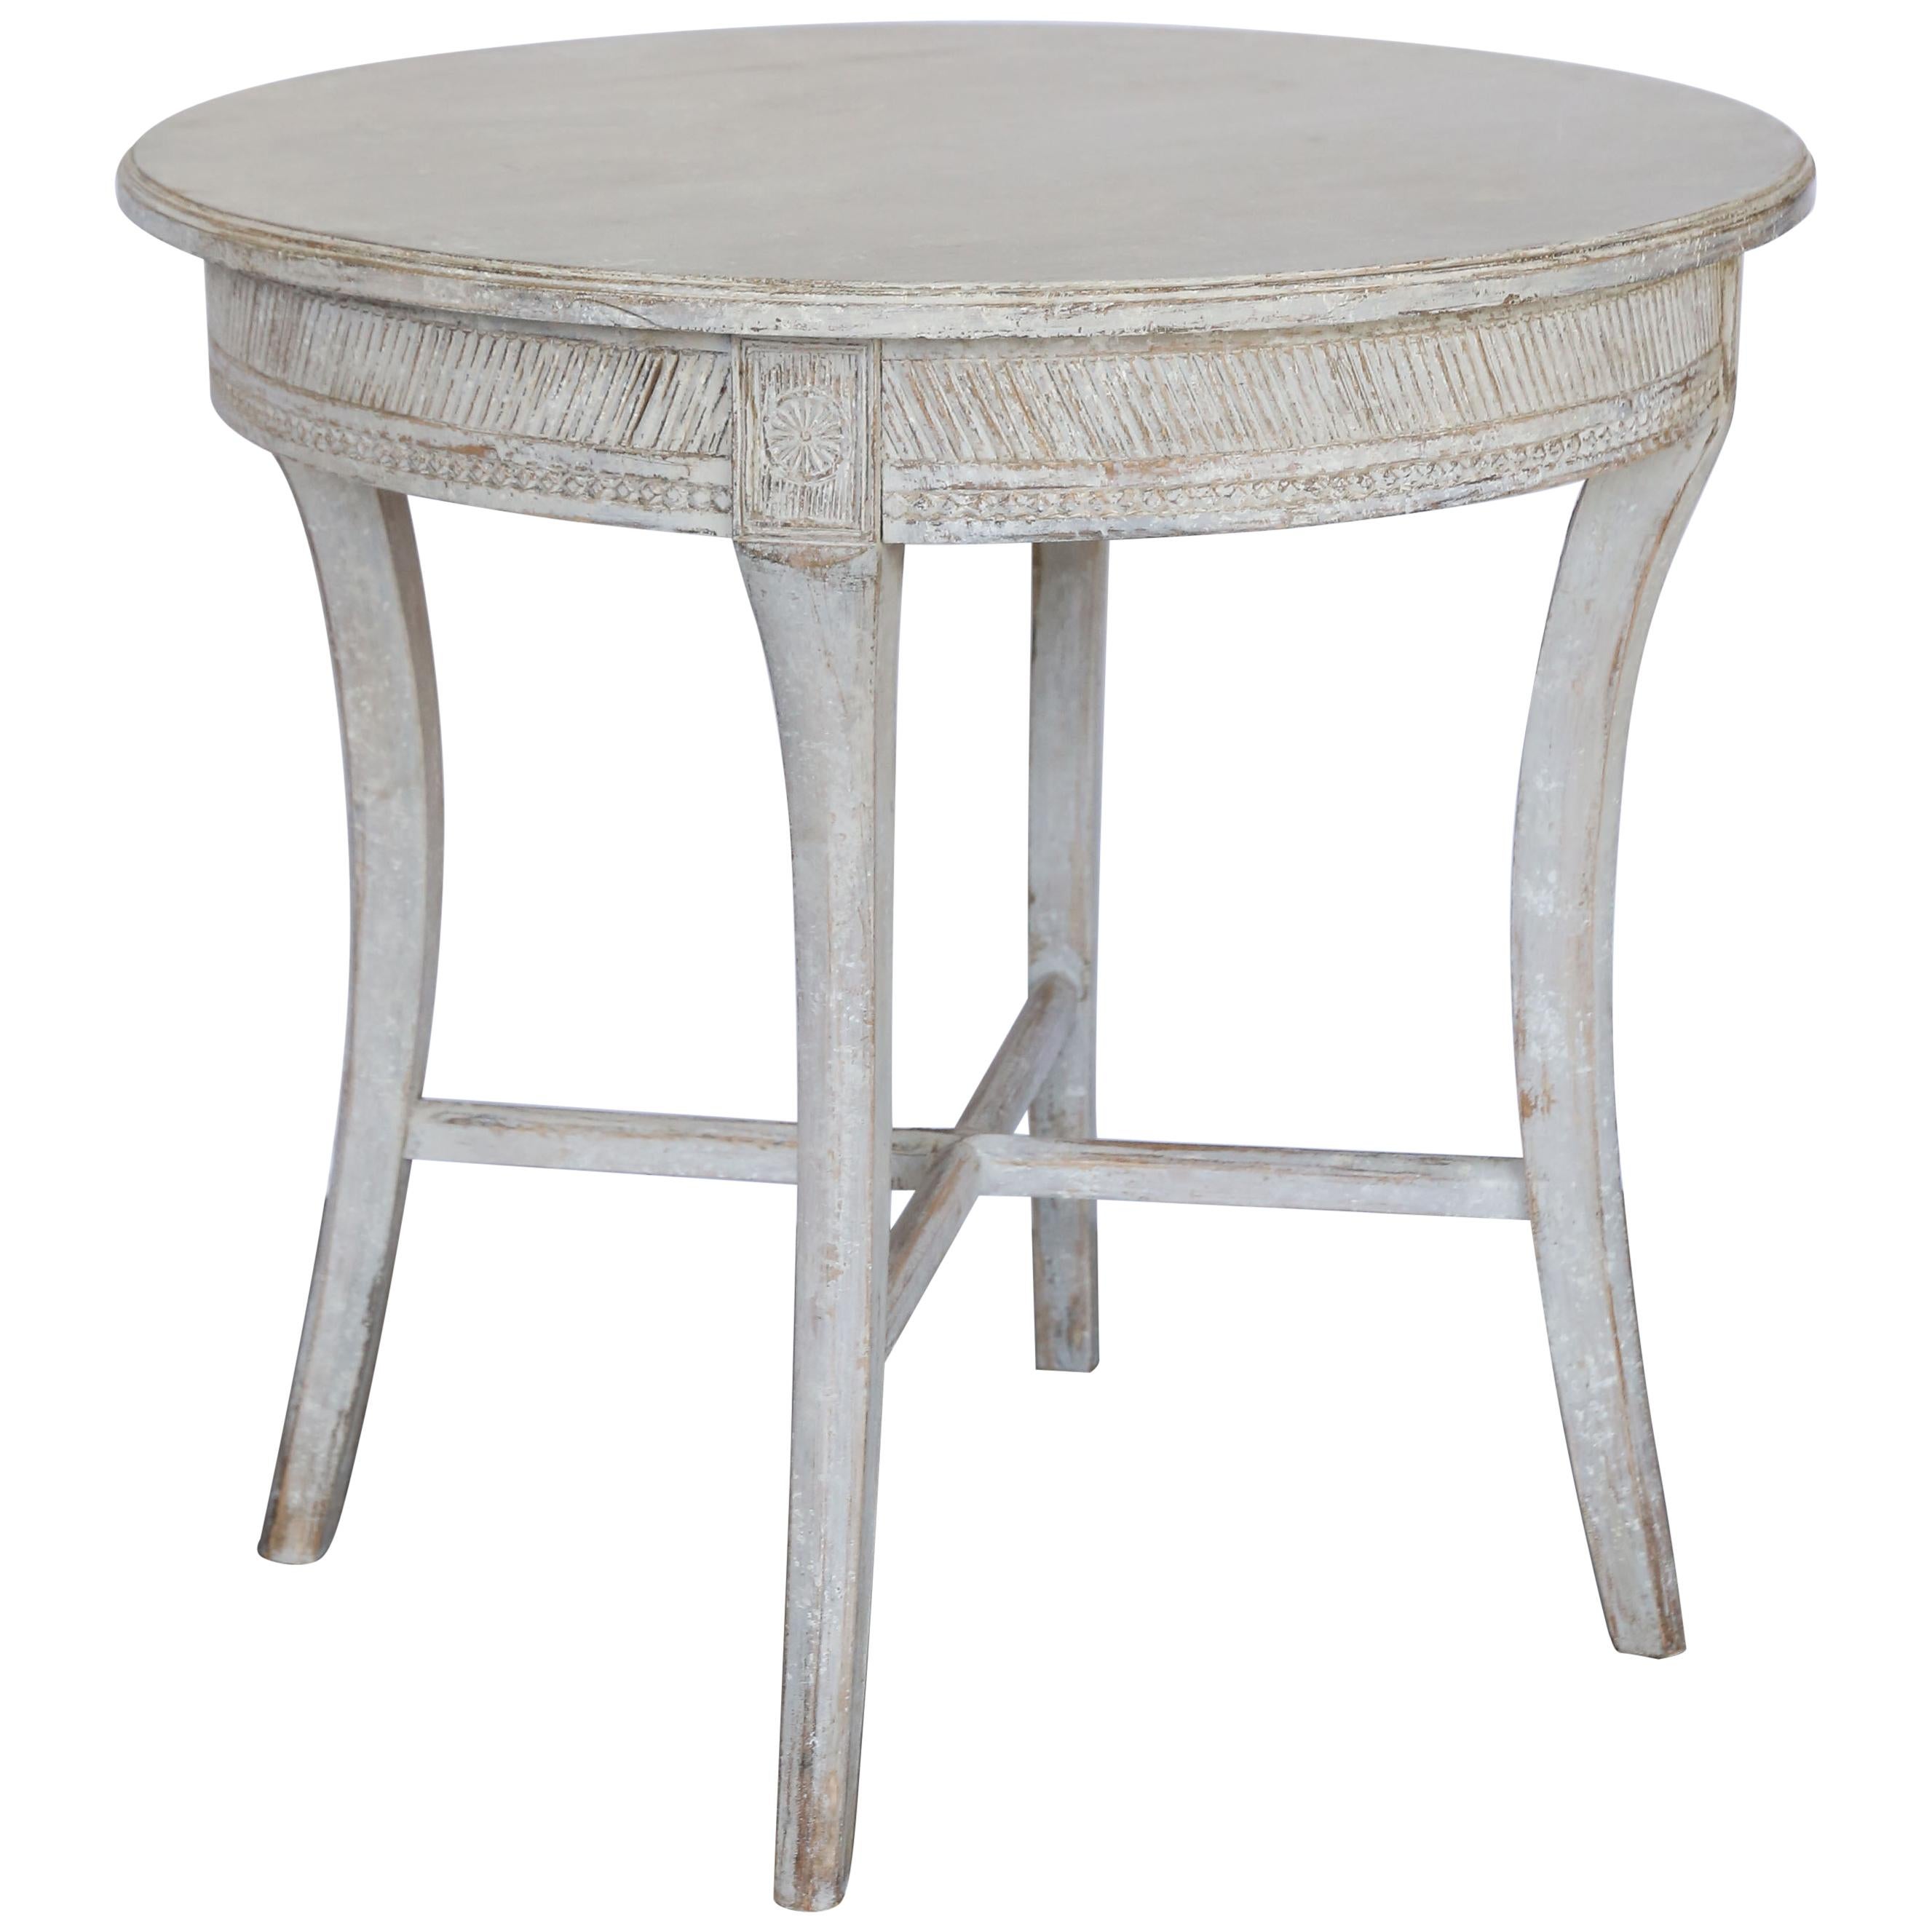 19th Century Round Gustavian Table For Sale